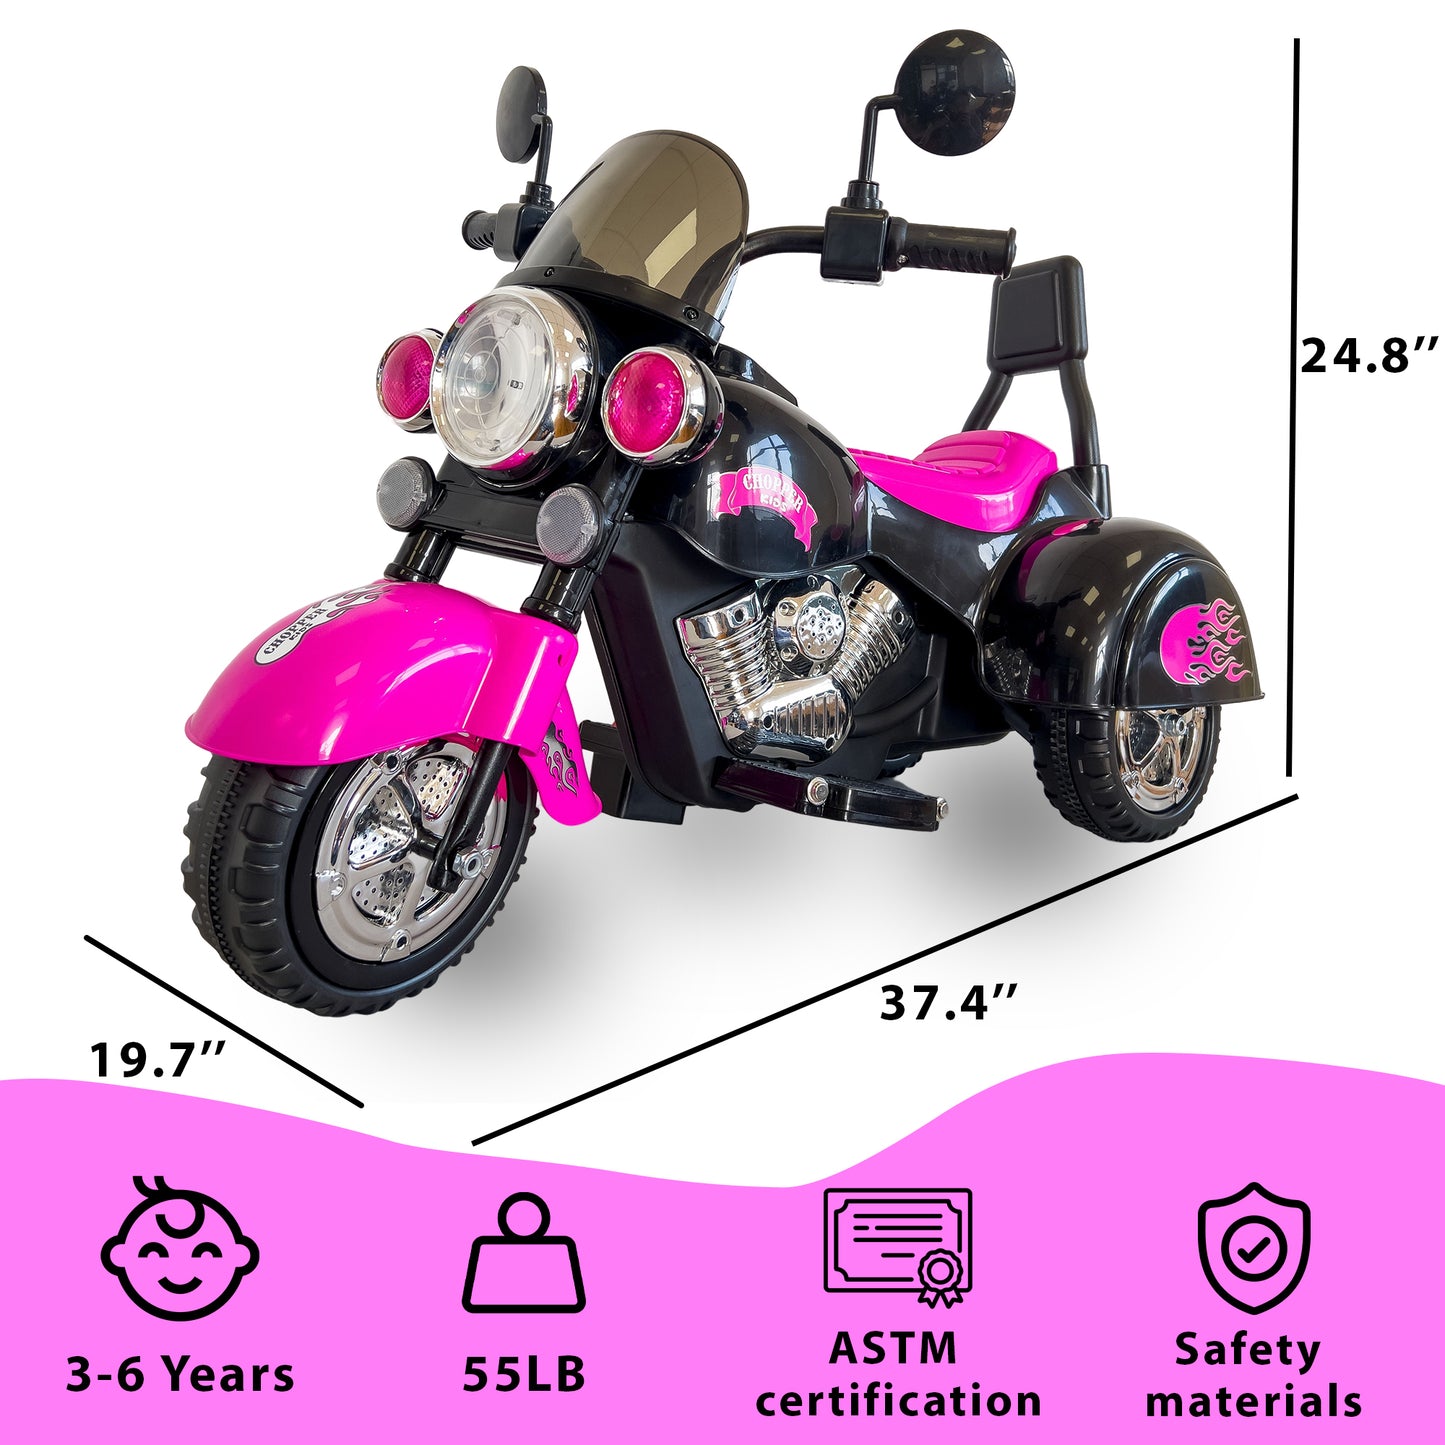 Kids Ride On Motorcycle Toy, 3-Wheel Chopper Motorbike with LED Colorful Headlights Horn, Pink 6V Battery Powered Riding on Electric Harley Motorcycle for Boys Girls